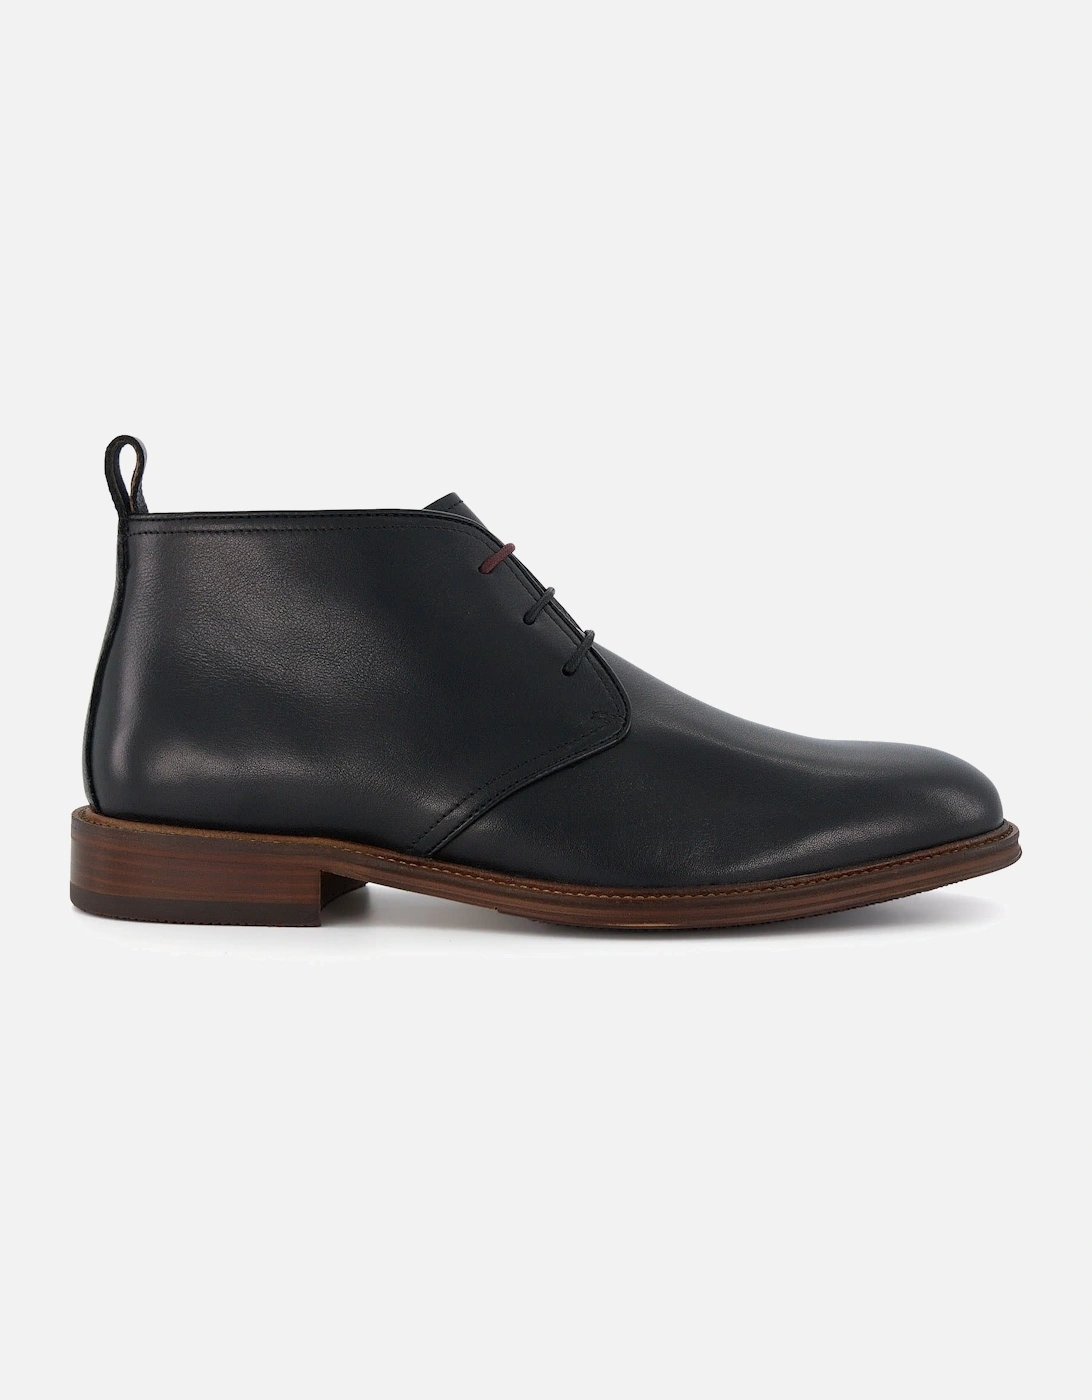 Mens Coopper - Casual Chukka Boots